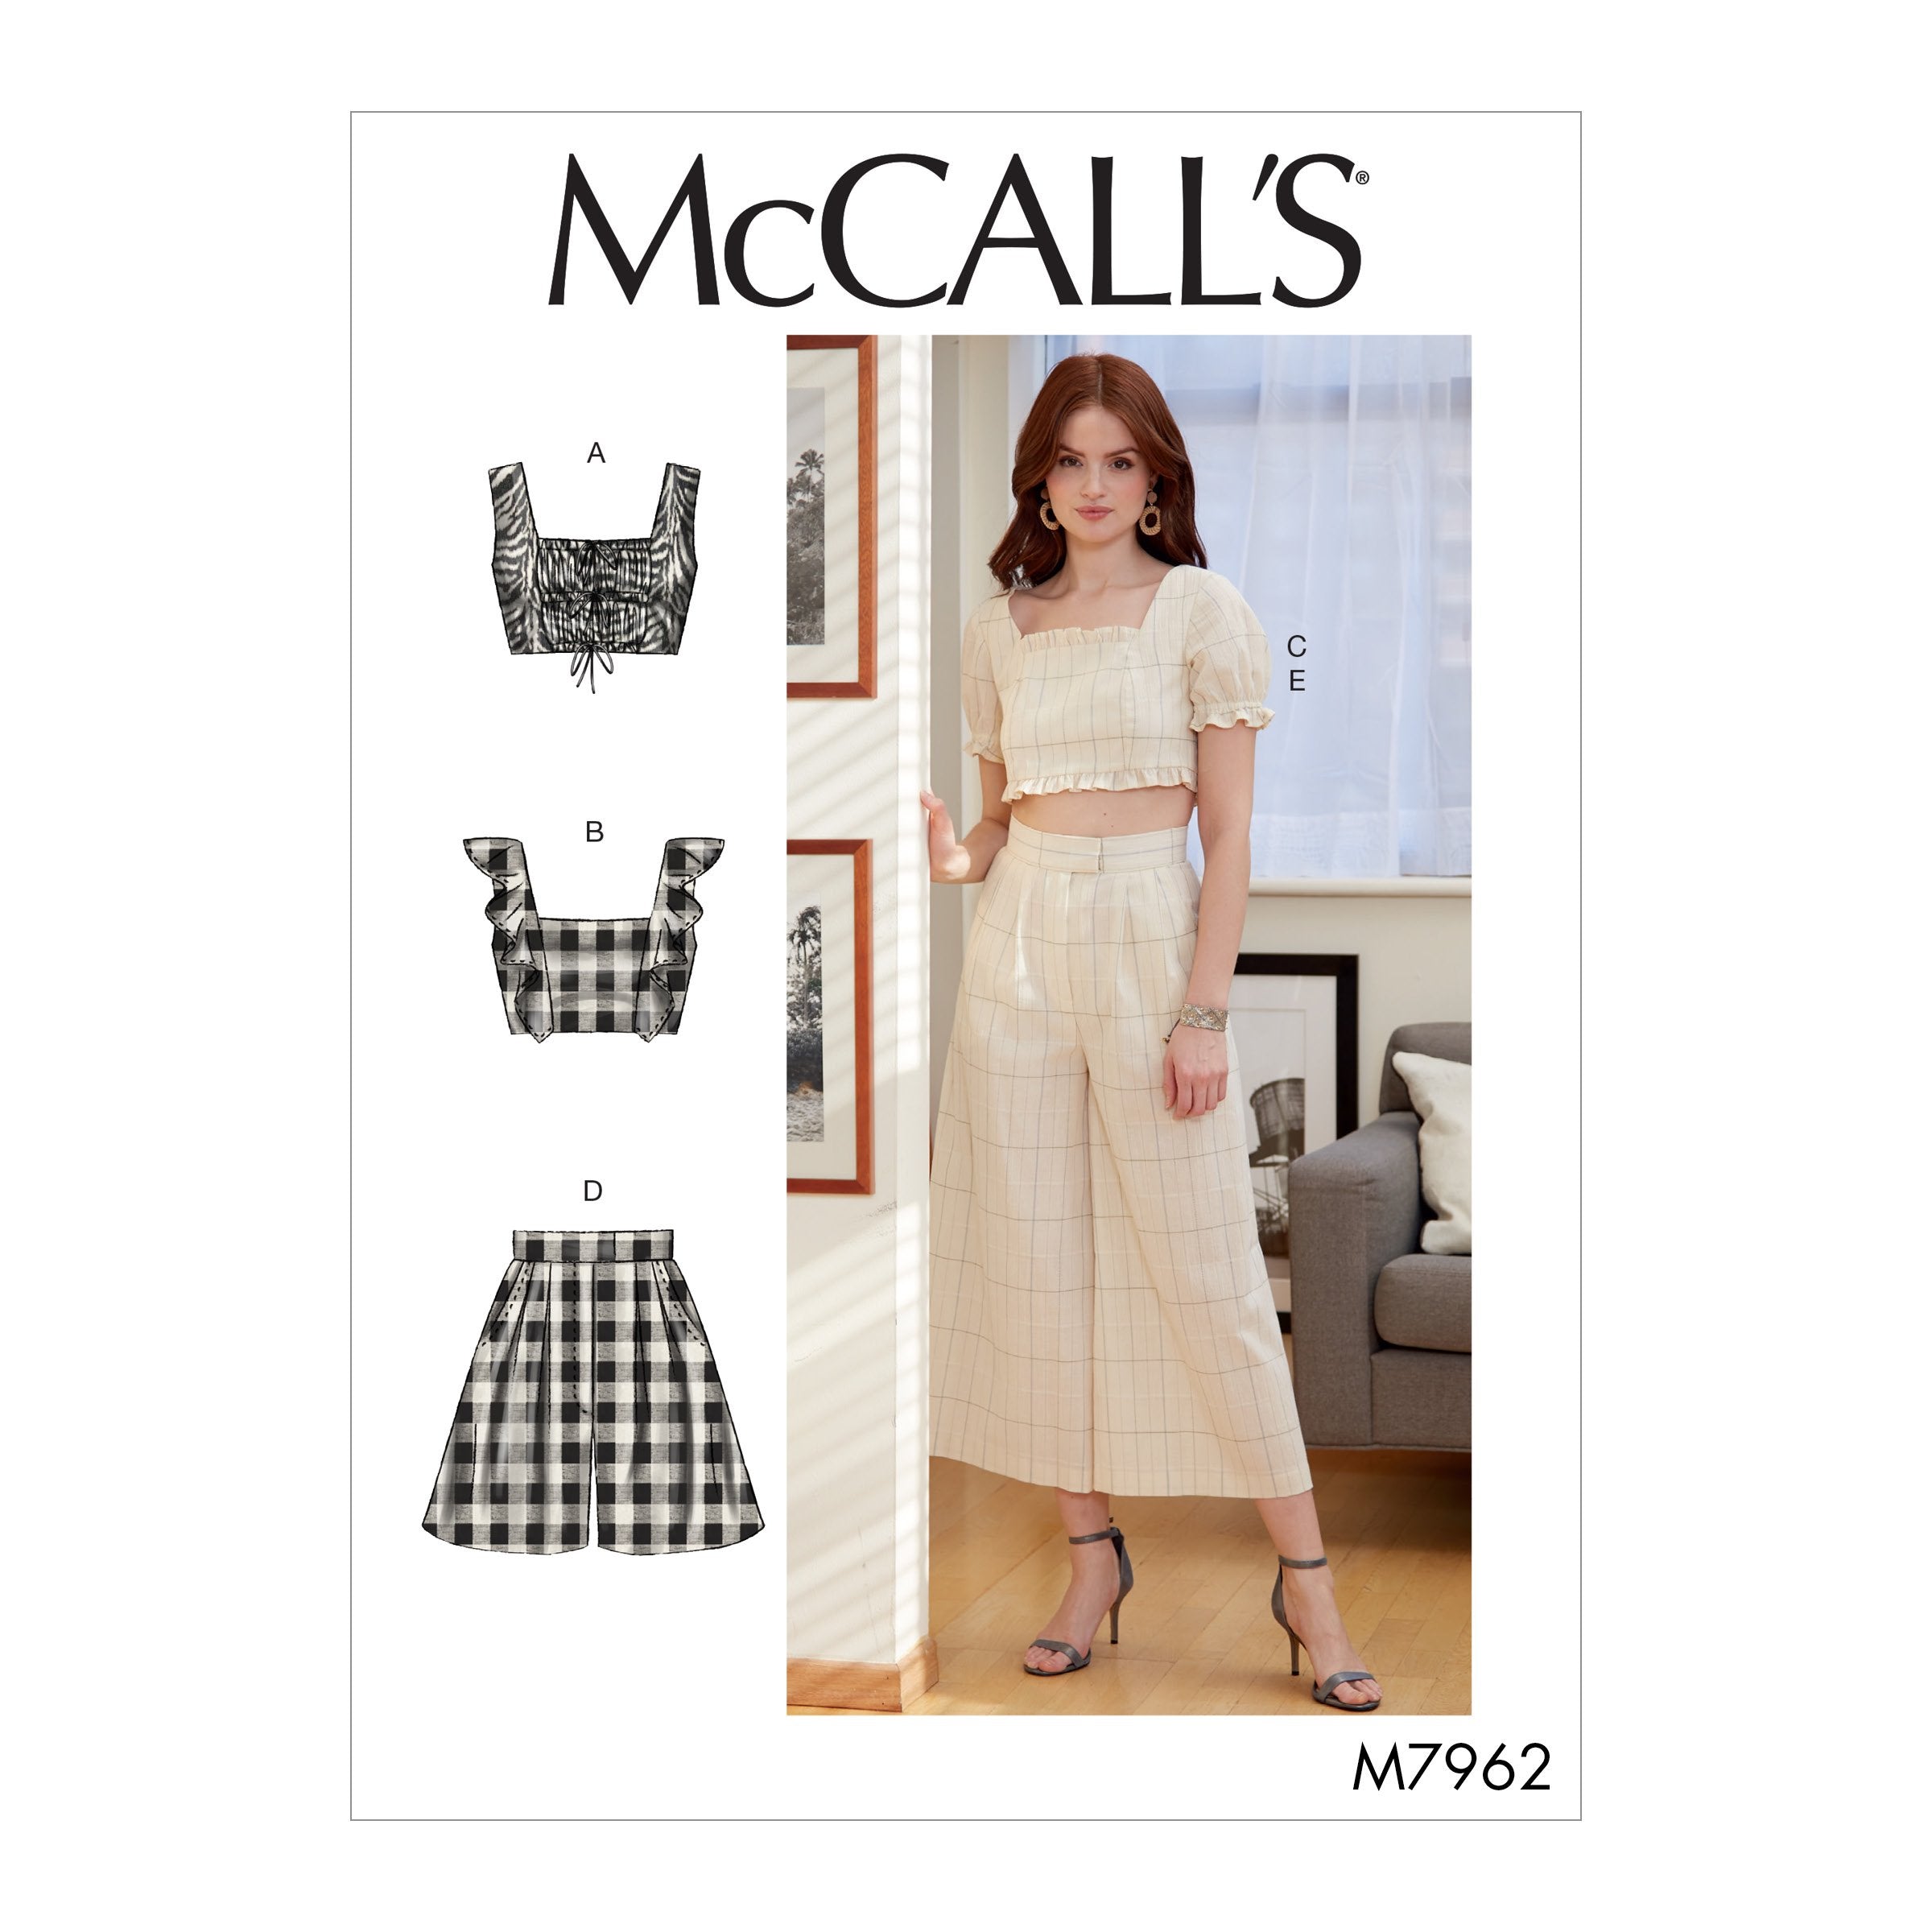 McCalls 7962 Tops, Shorts and Pants sewing pattern from Jaycotts Sewing Supplies